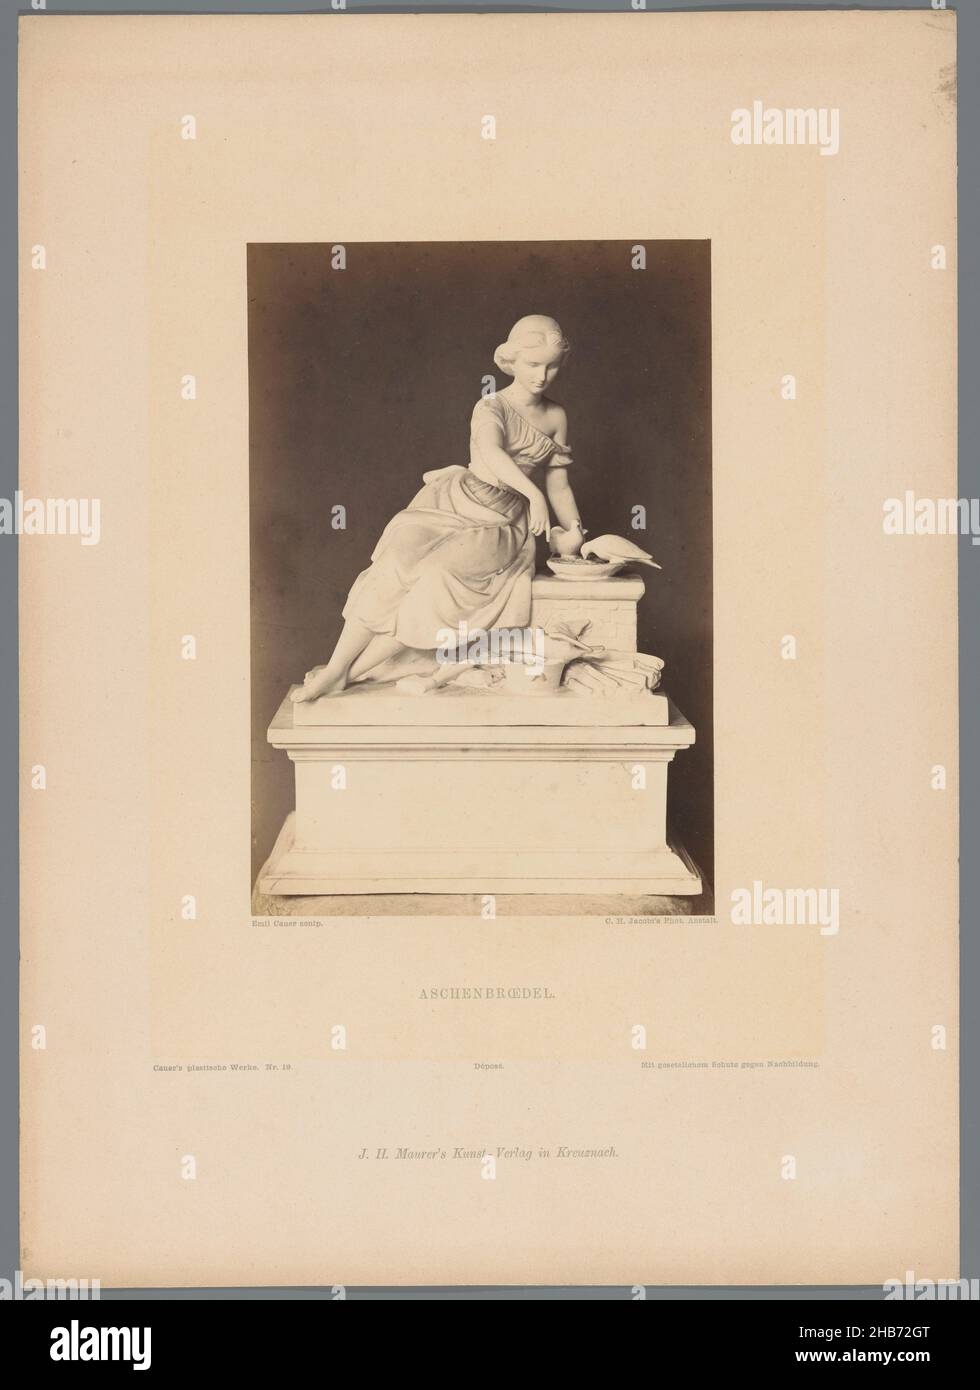 Cinderella by Robert Cauer, Aschenbroedel (title on object), Carl Heinrich Jacobi (mentioned on object), publisher: J. H. Maurer (mentioned on object), 1850 - 1900, photographic support, cardboard, albumen print, height 350 mm × width 258 mm Stock Photo